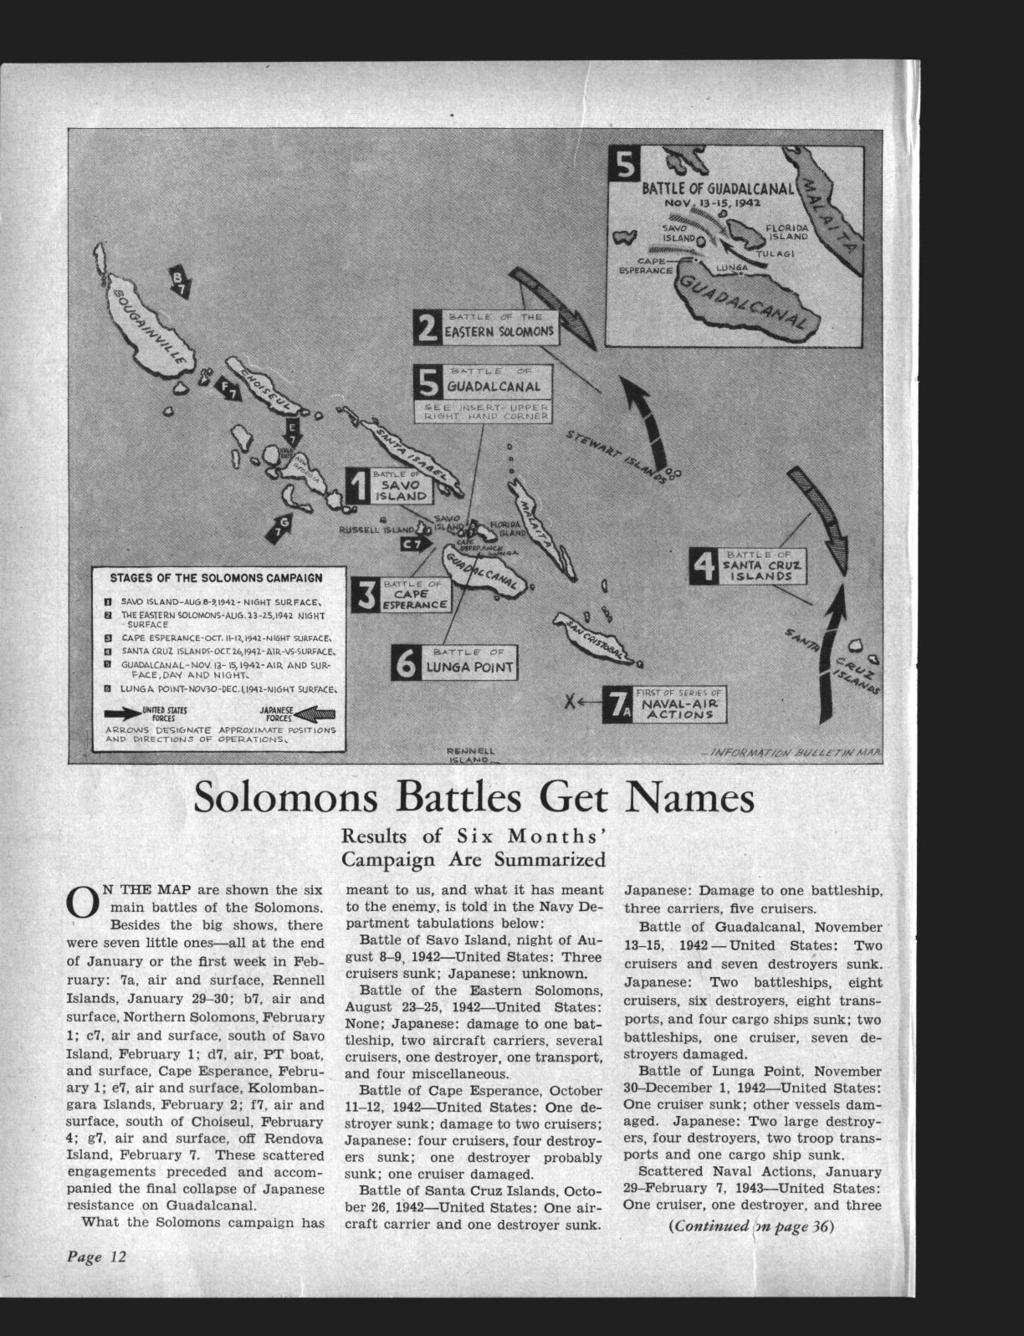 0 Solomons Bttles Get N THE MAP re shown the six min bttles of the Solomons.